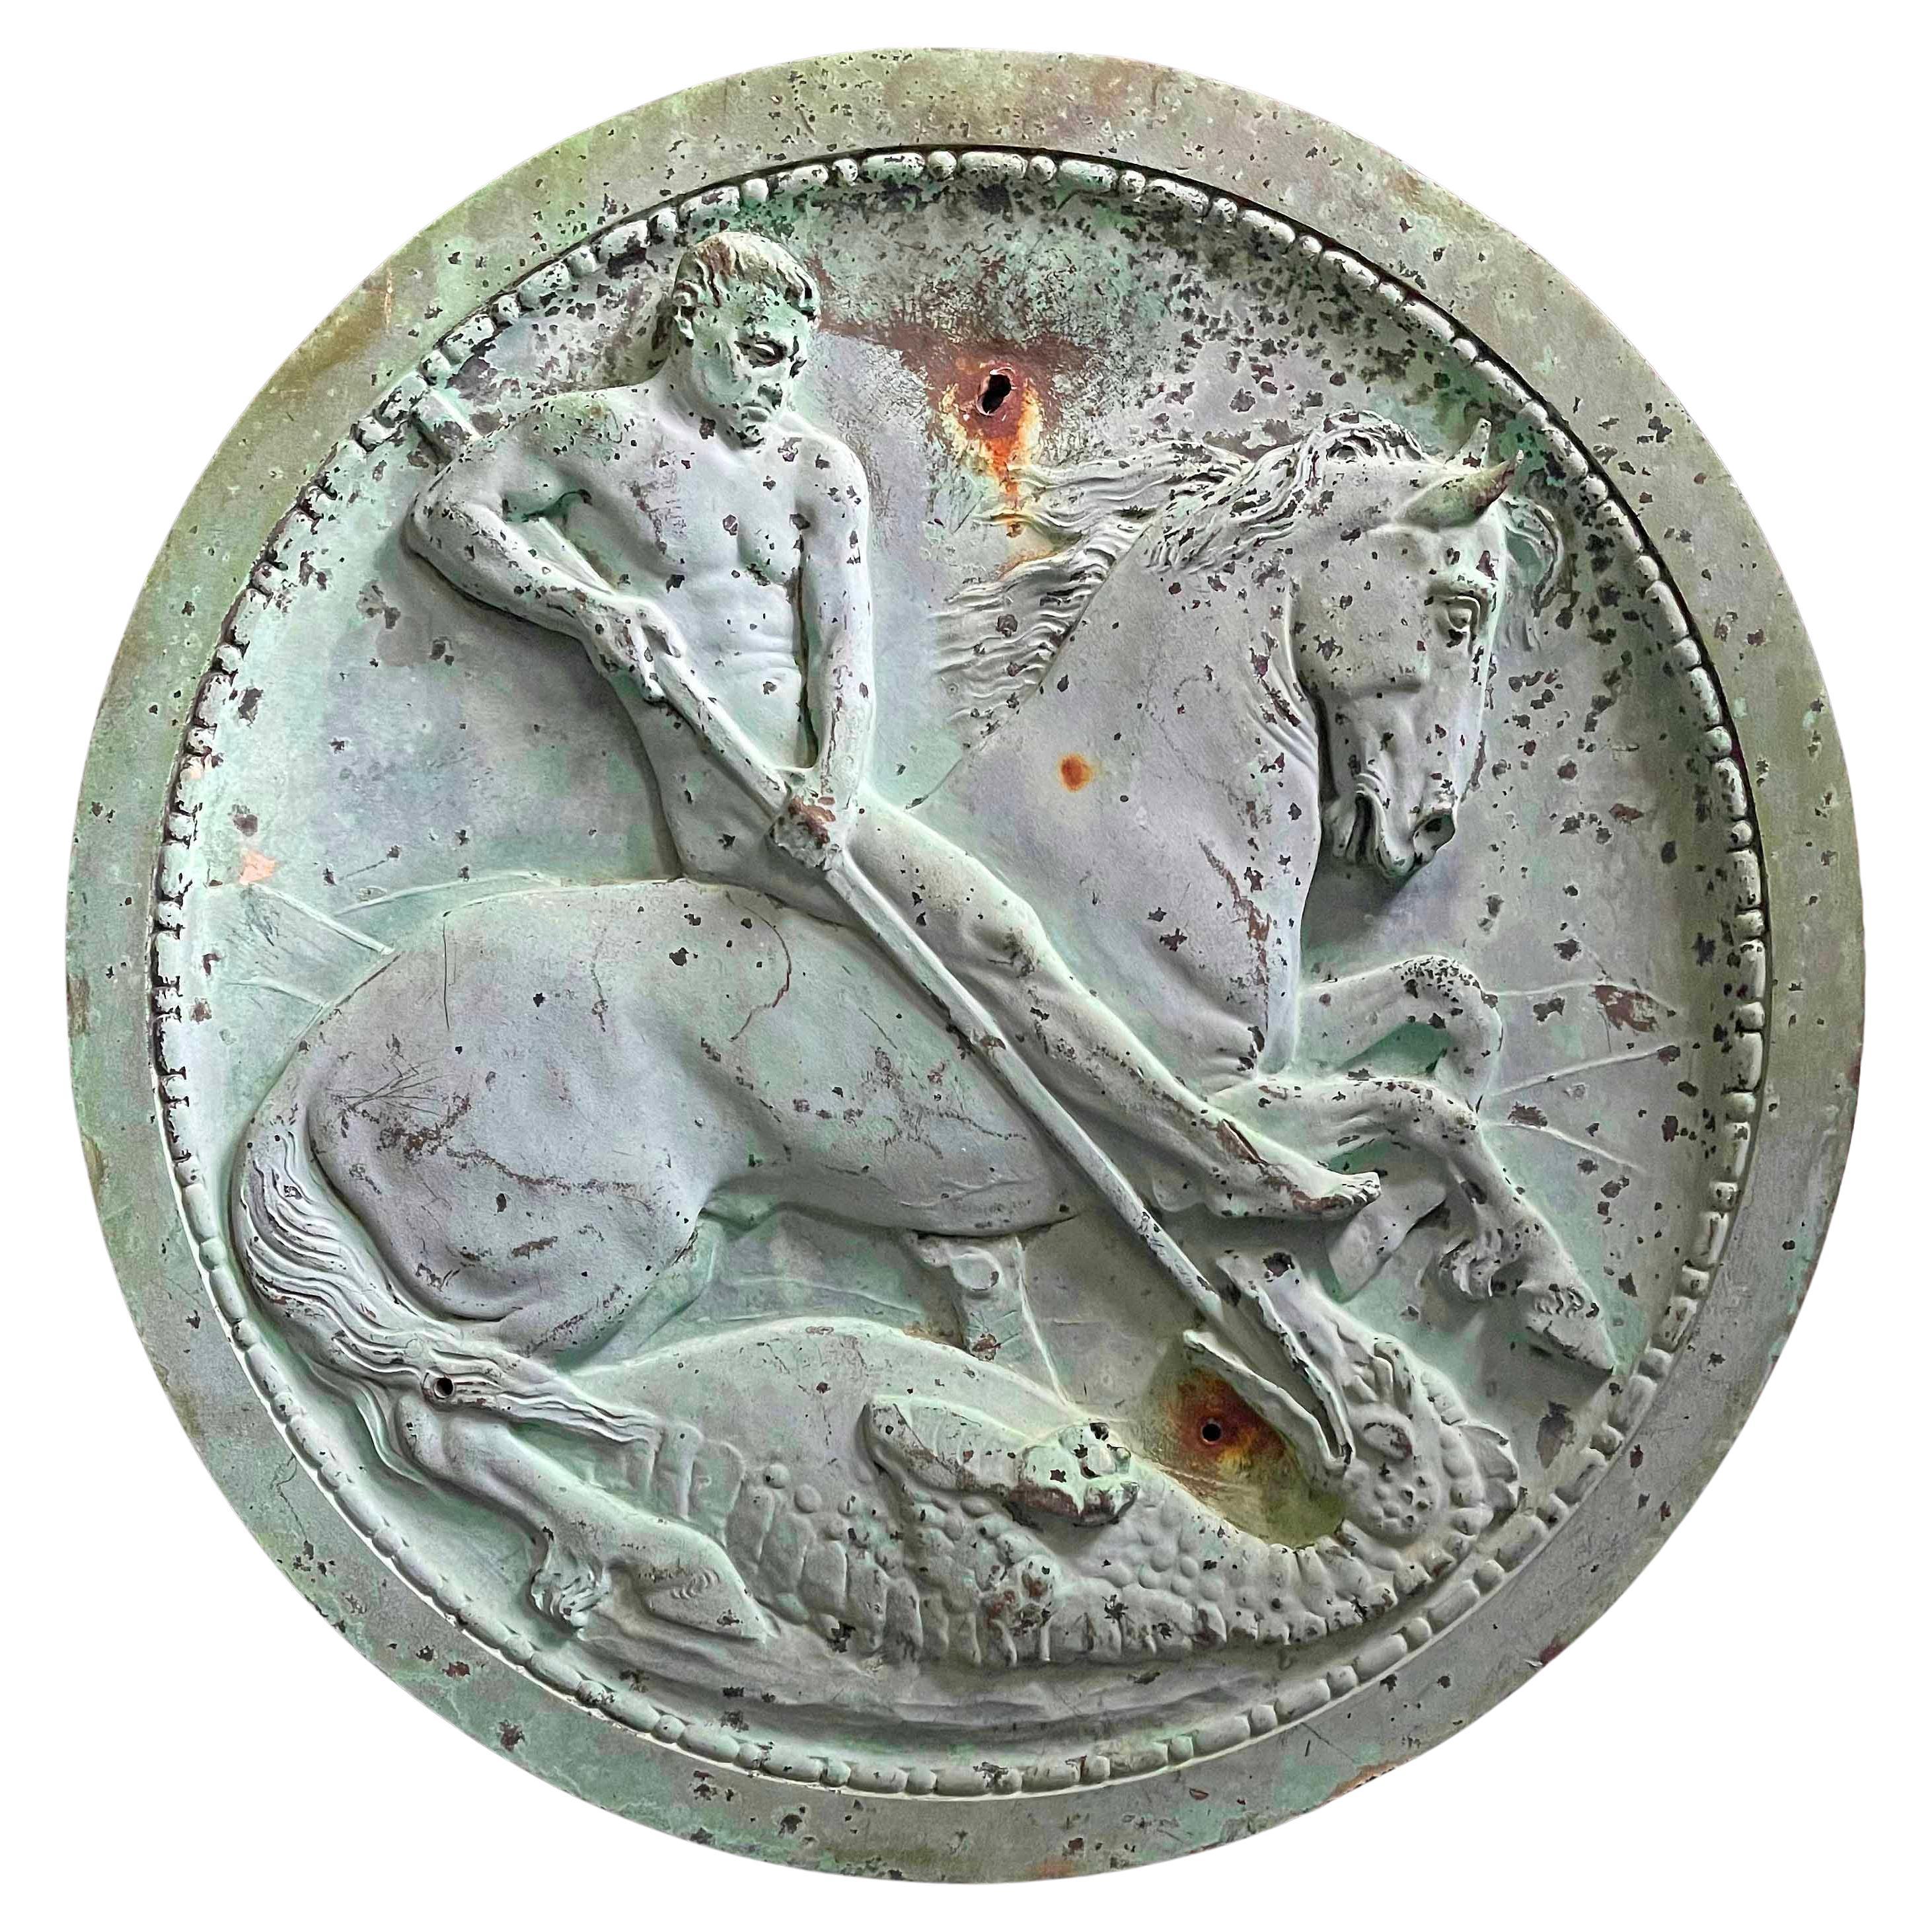 "St. George and the Dragon", Large Bronze Relief Sculpture with Male Nude For Sale